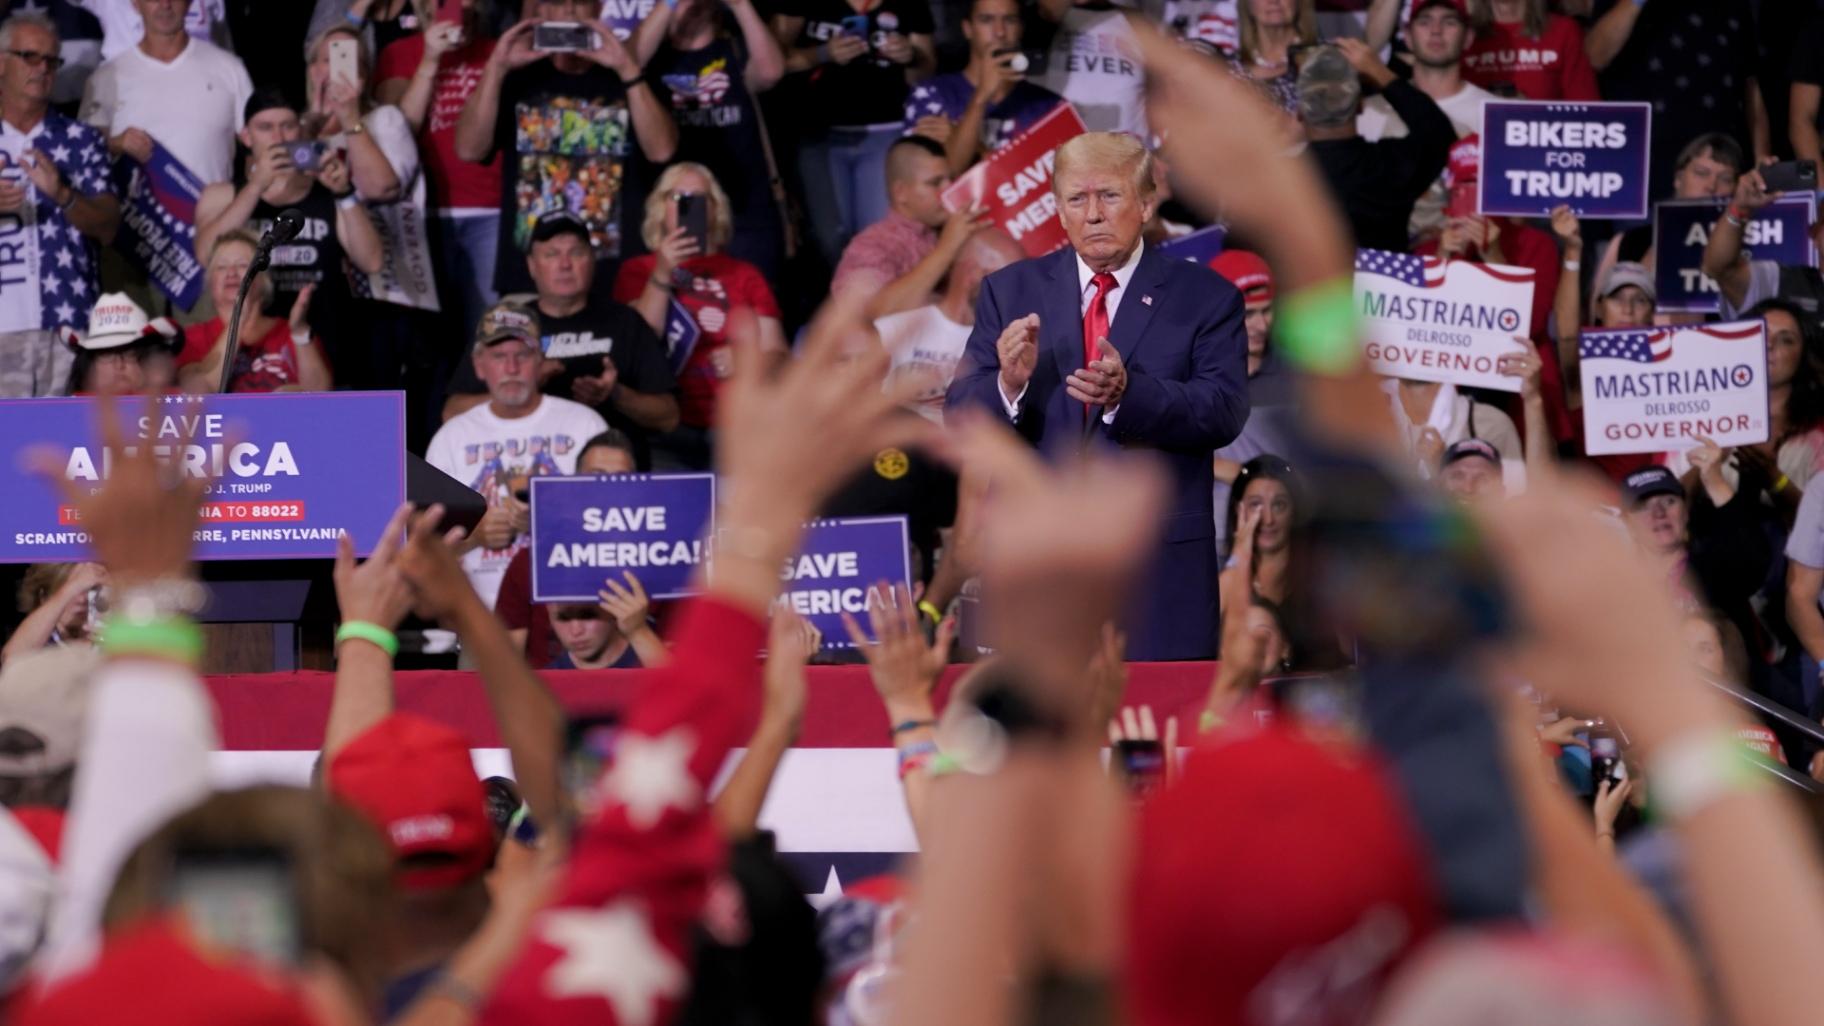 Former President Donald Trump speaks at a rally in Wilkes-Barre, Pa., Sept. 3, 2022. (AP Photo / Mary Altaffer, File)